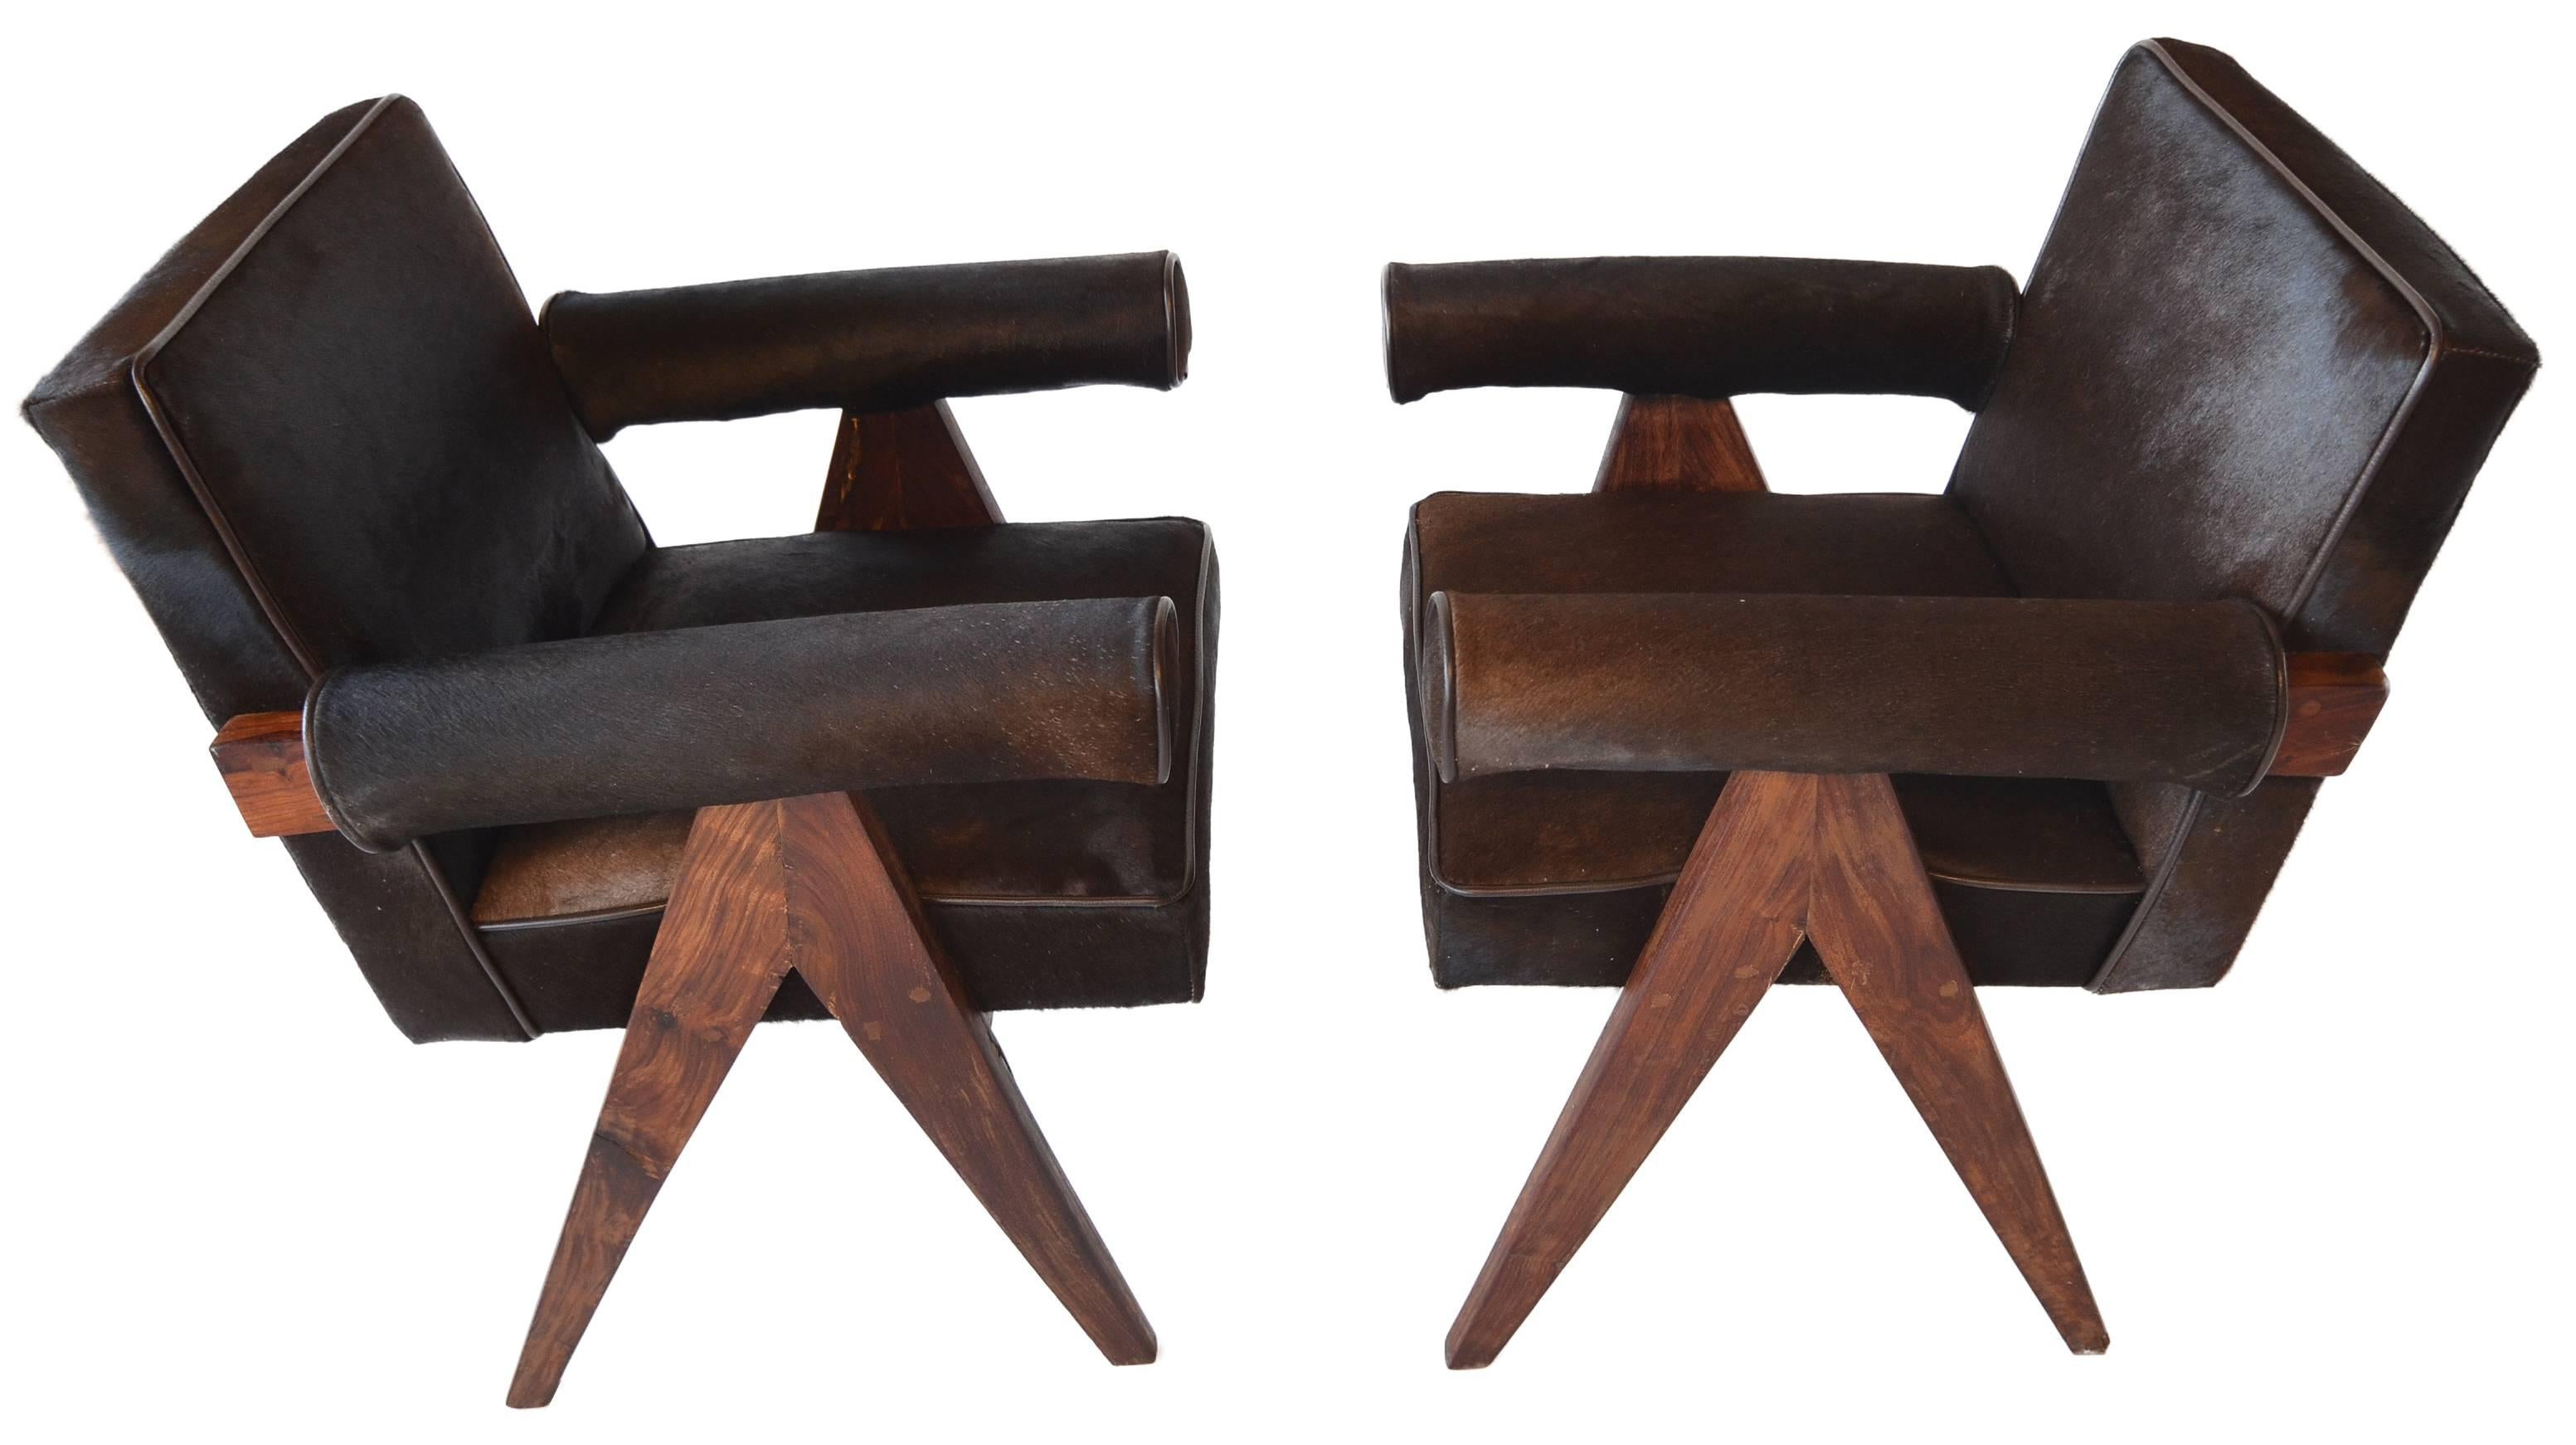 A pair of small production chairs by Pierre Jeanneret for the Chandigarh project, circa 1955.

A very nice pair of matching armchairs in solid Indian Rosewood (Sisso)

Reupholstered in a thick dark brown Buffalo hide.

Authentic and solid